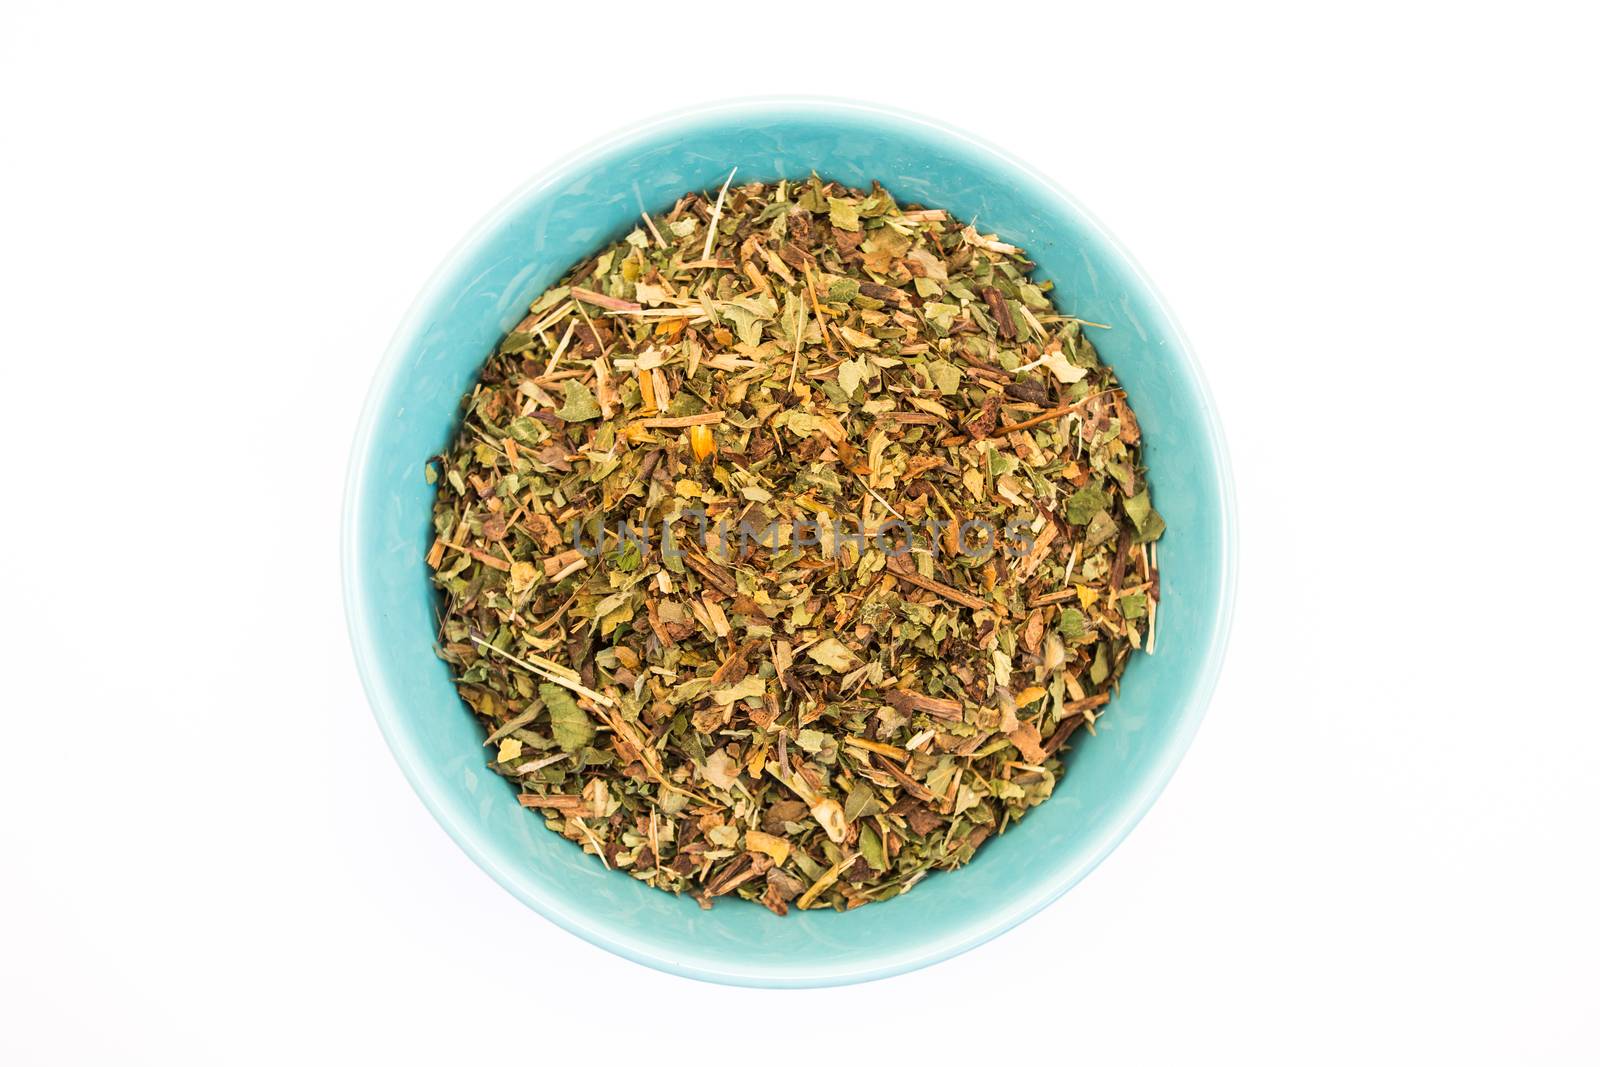 Tea herb in bowl on white background